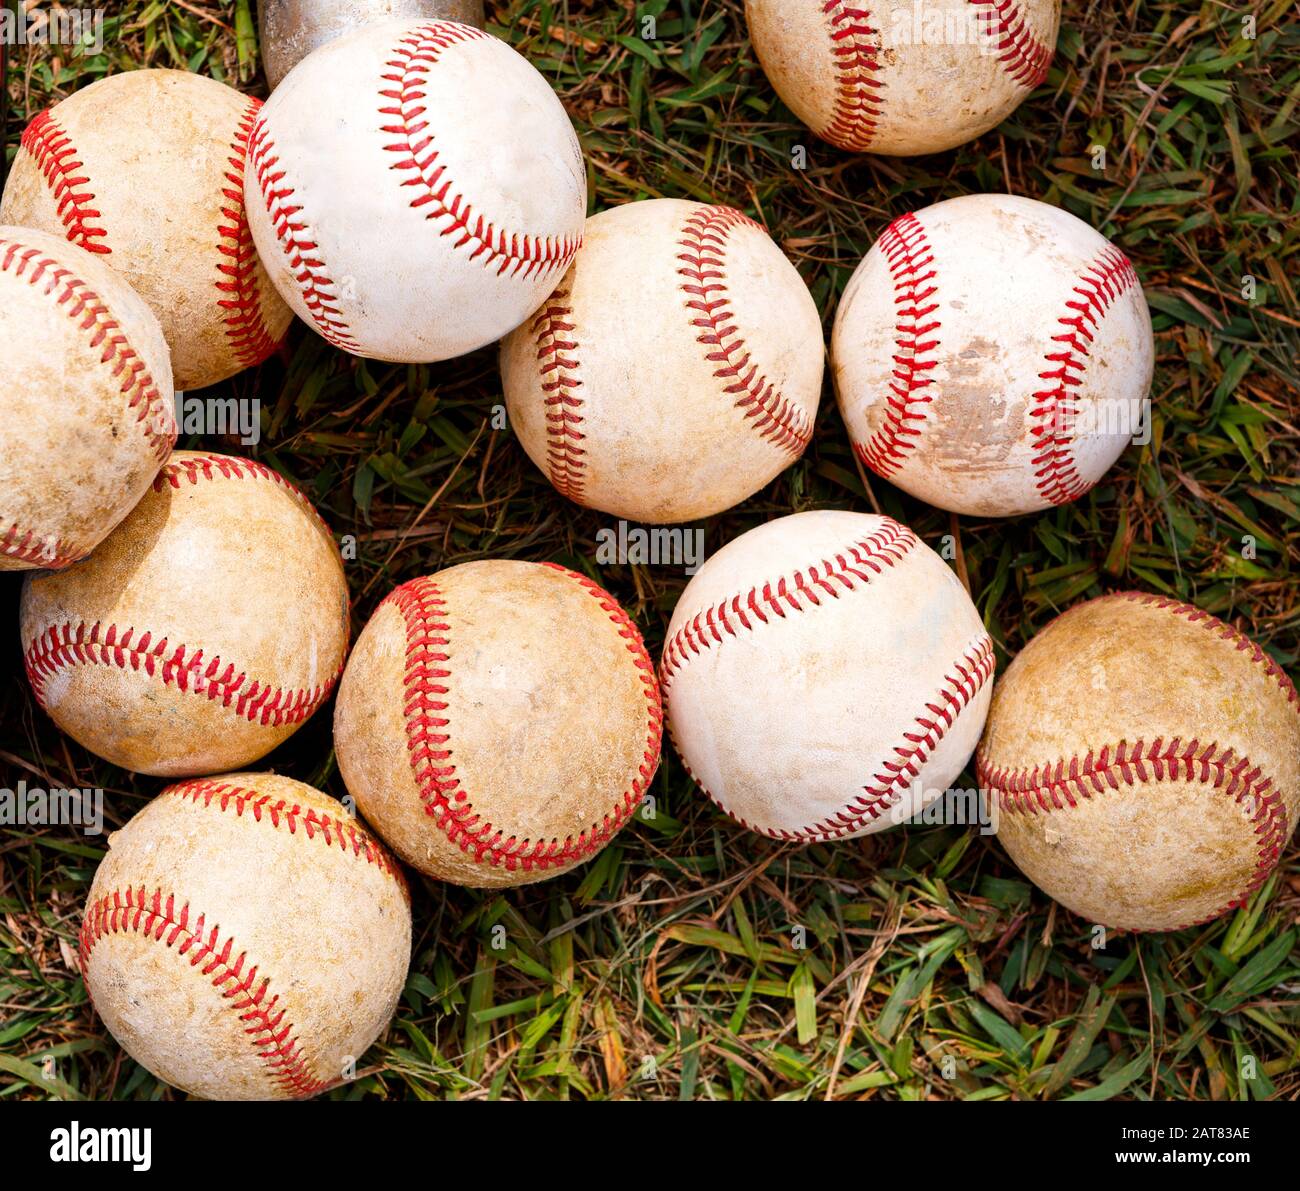 Used baseballs on the grass near the playing field Stock Photo